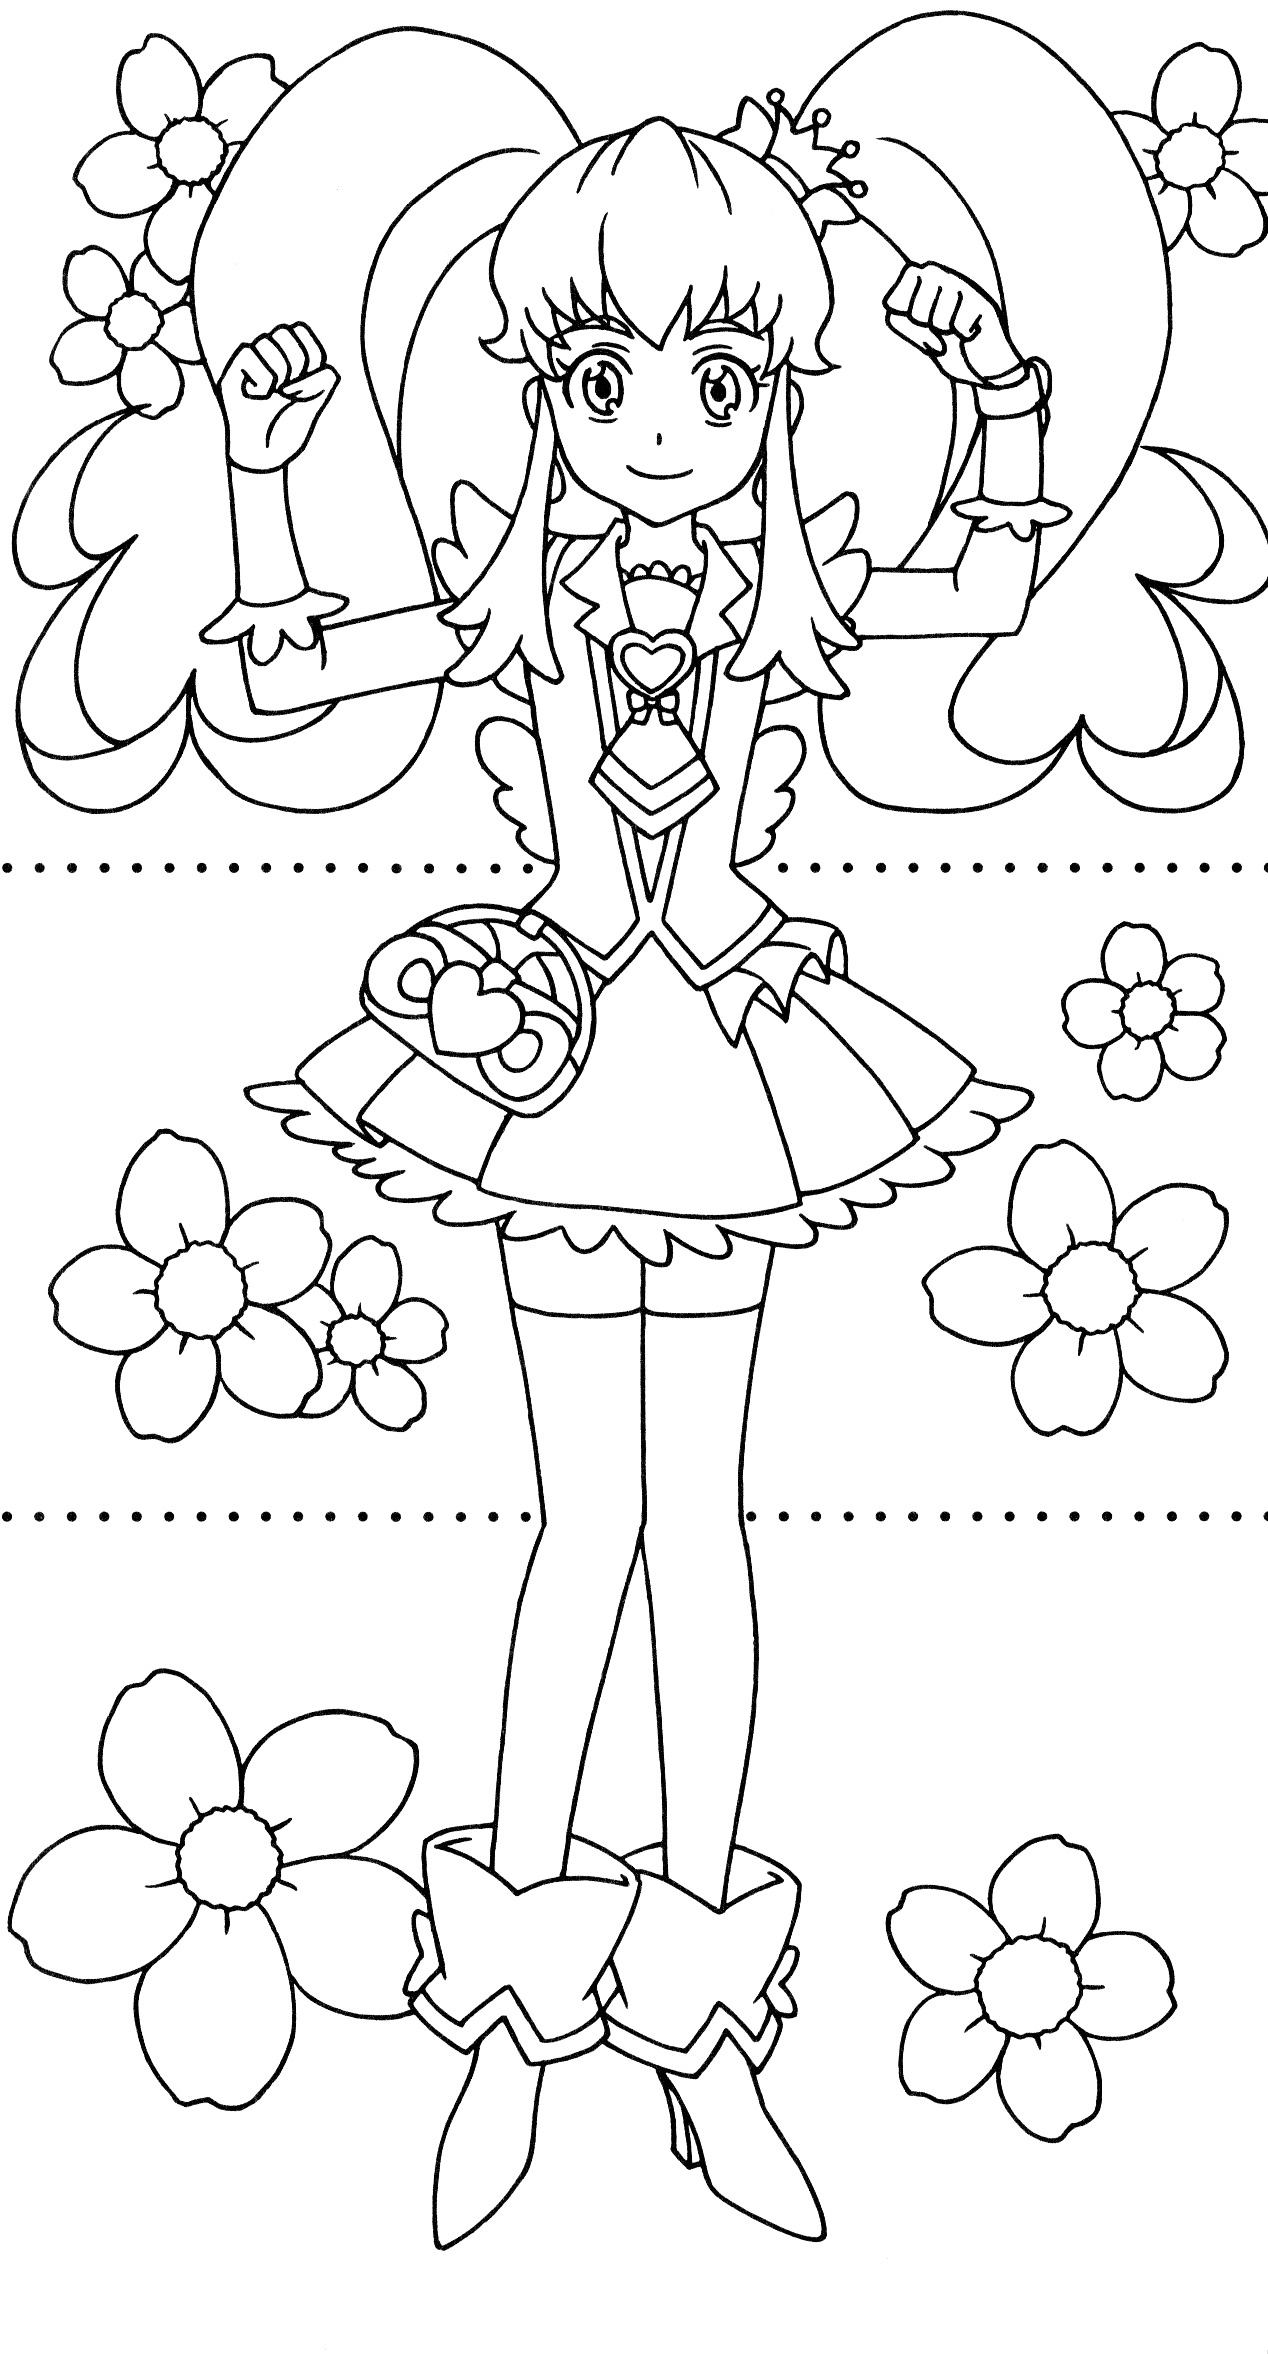 Happiness Charge Precure Dressup Coloring Book 31